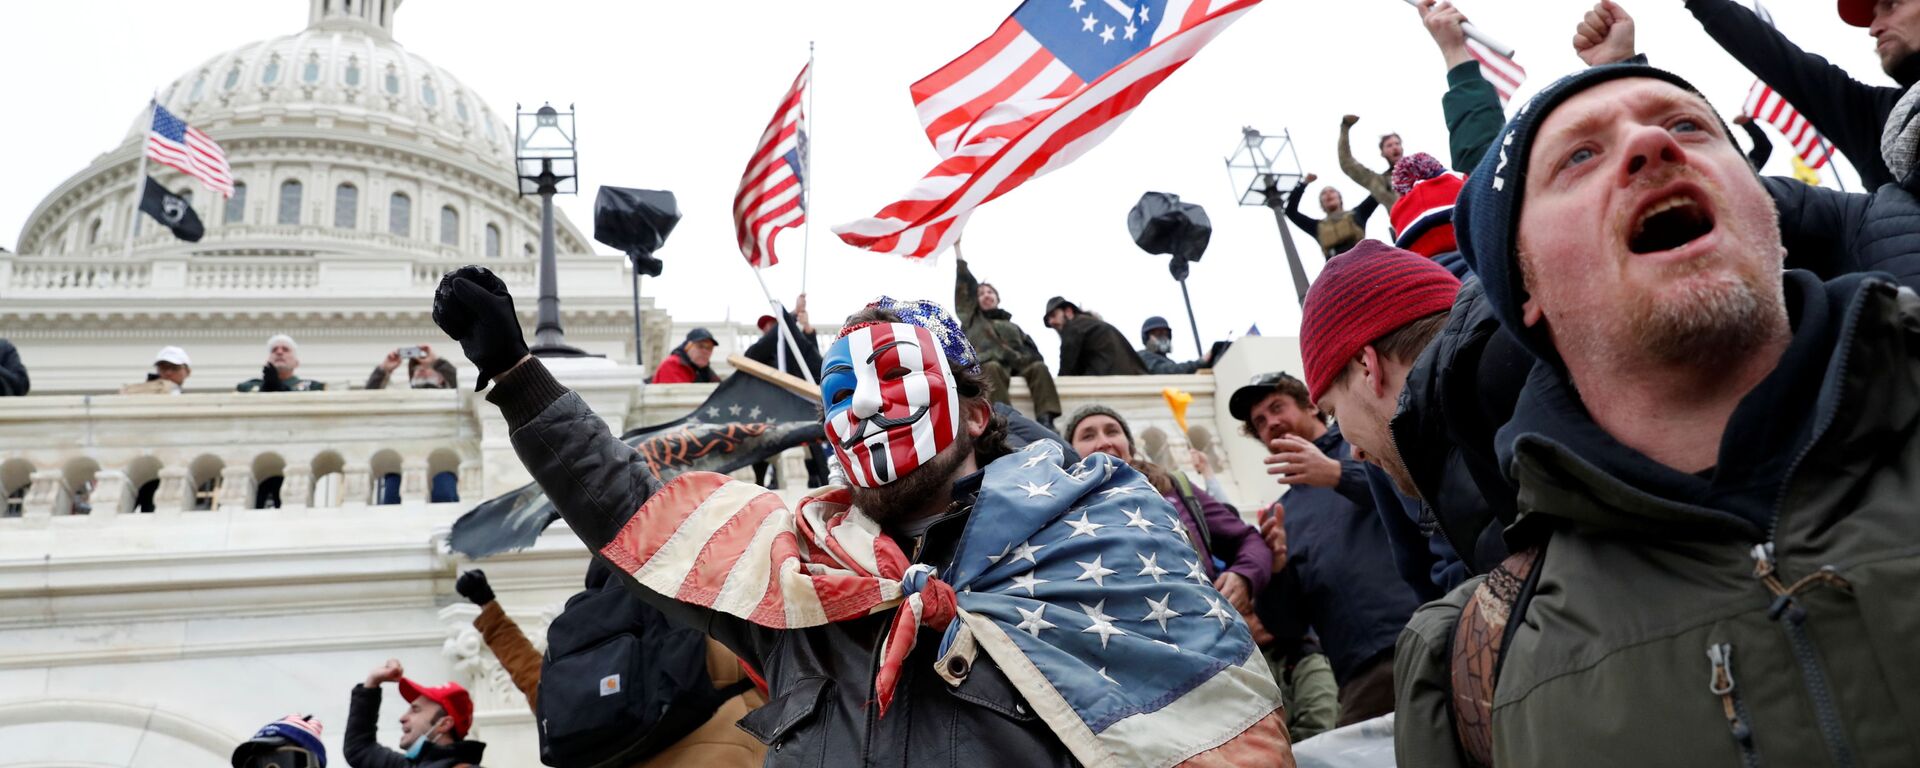 Protesters clash with Capitol police during a rally to contest the certification of the 2020 U.S. presidential election results by the U.S. Congress, at the U.S. Capitol Building in Washington, U.S, January 6, 2021. - اسپوتنیک افغانستان  , 1920, 13.01.2021